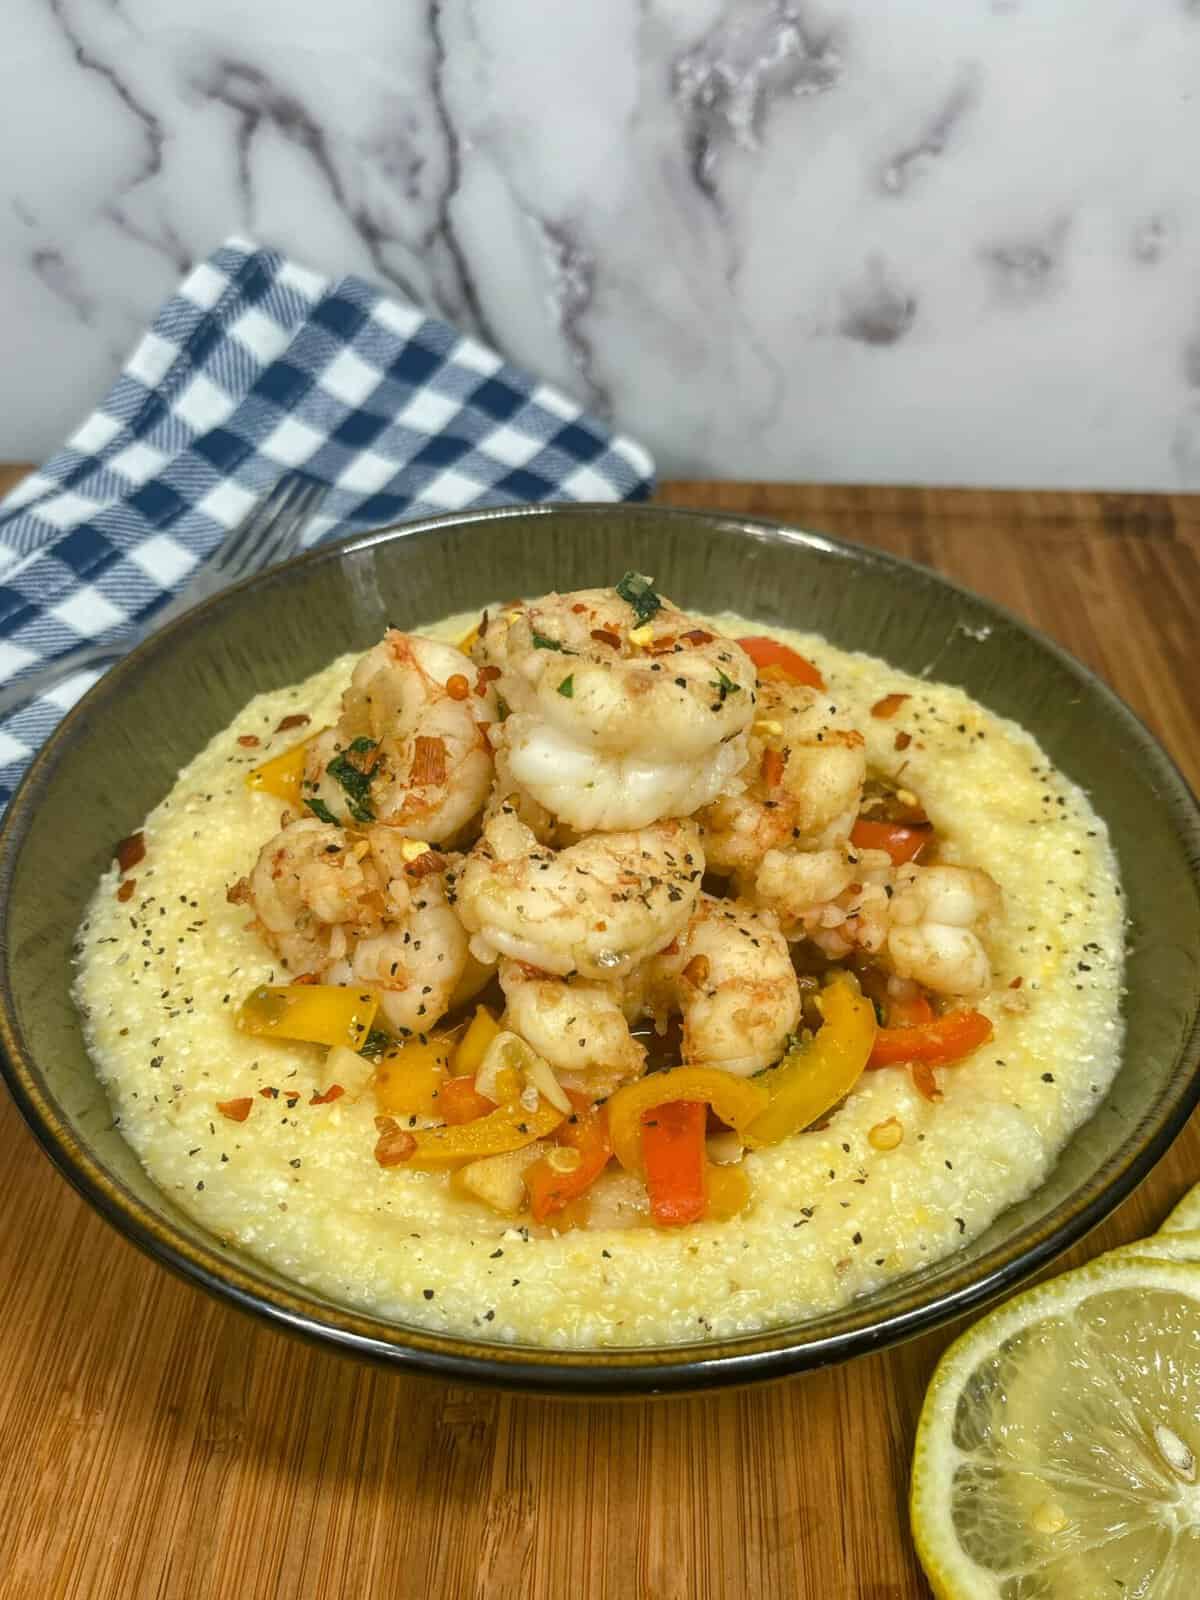 Bowl of shrimp and grits with lemon and napkin